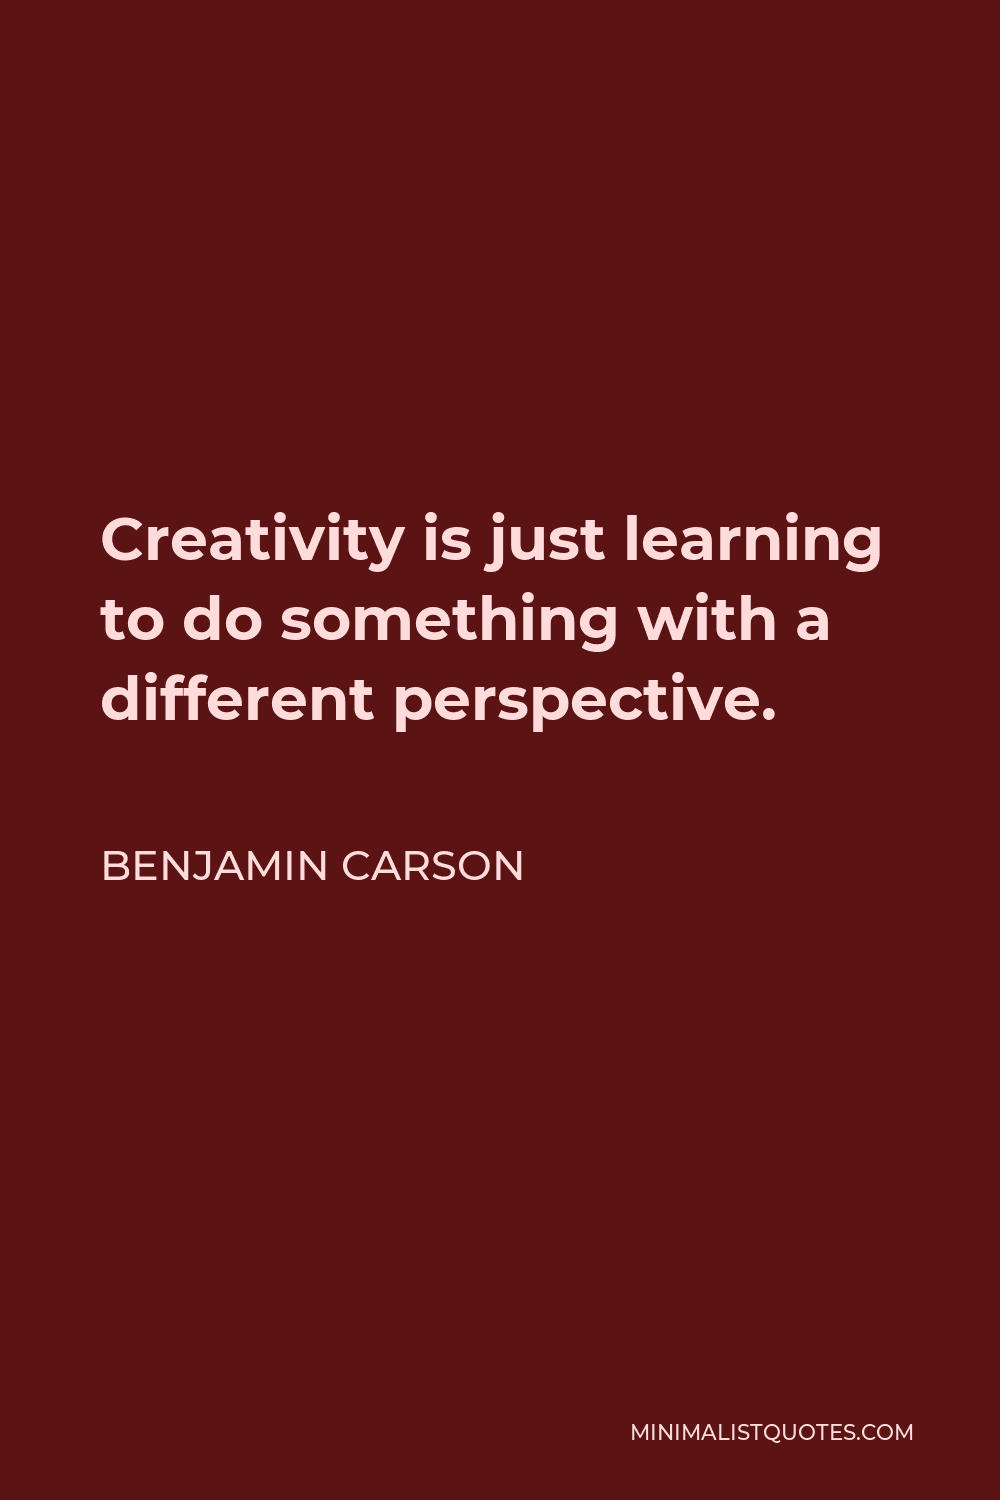 Benjamin Carson Quote - Creativity is just learning to do something with a different perspective.